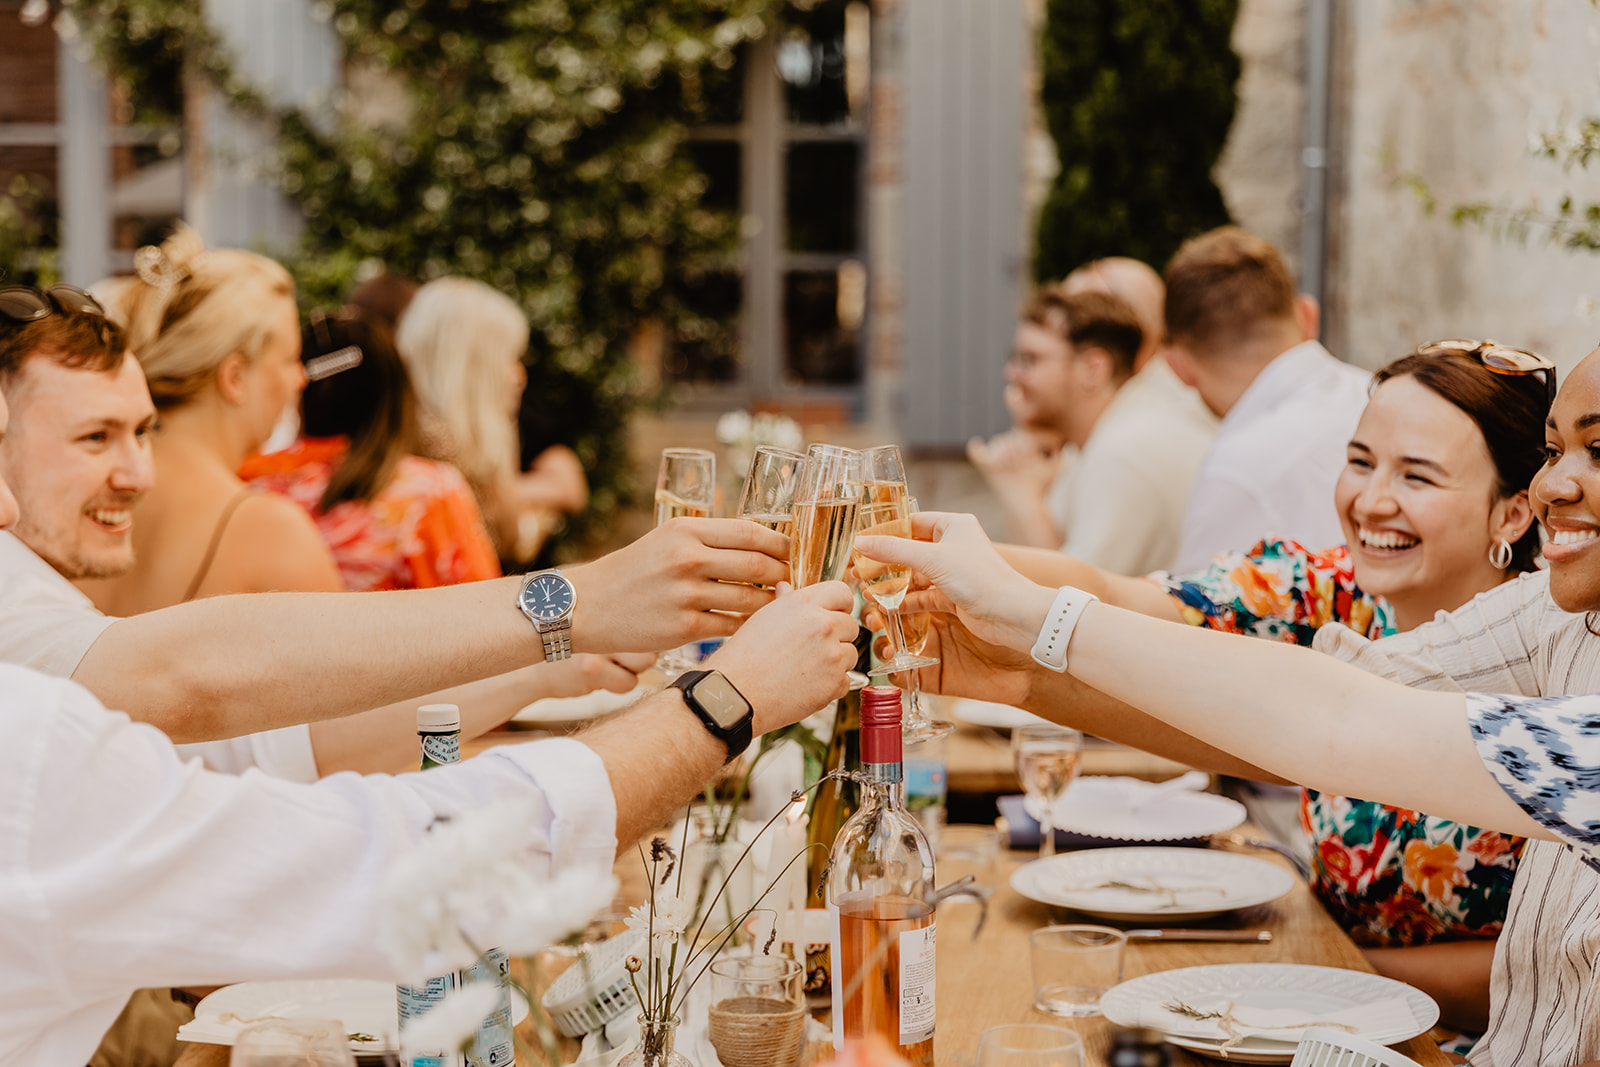 Guests toasting at a Destination Wedding in France. Photography & Videography by OliveJoy Photography